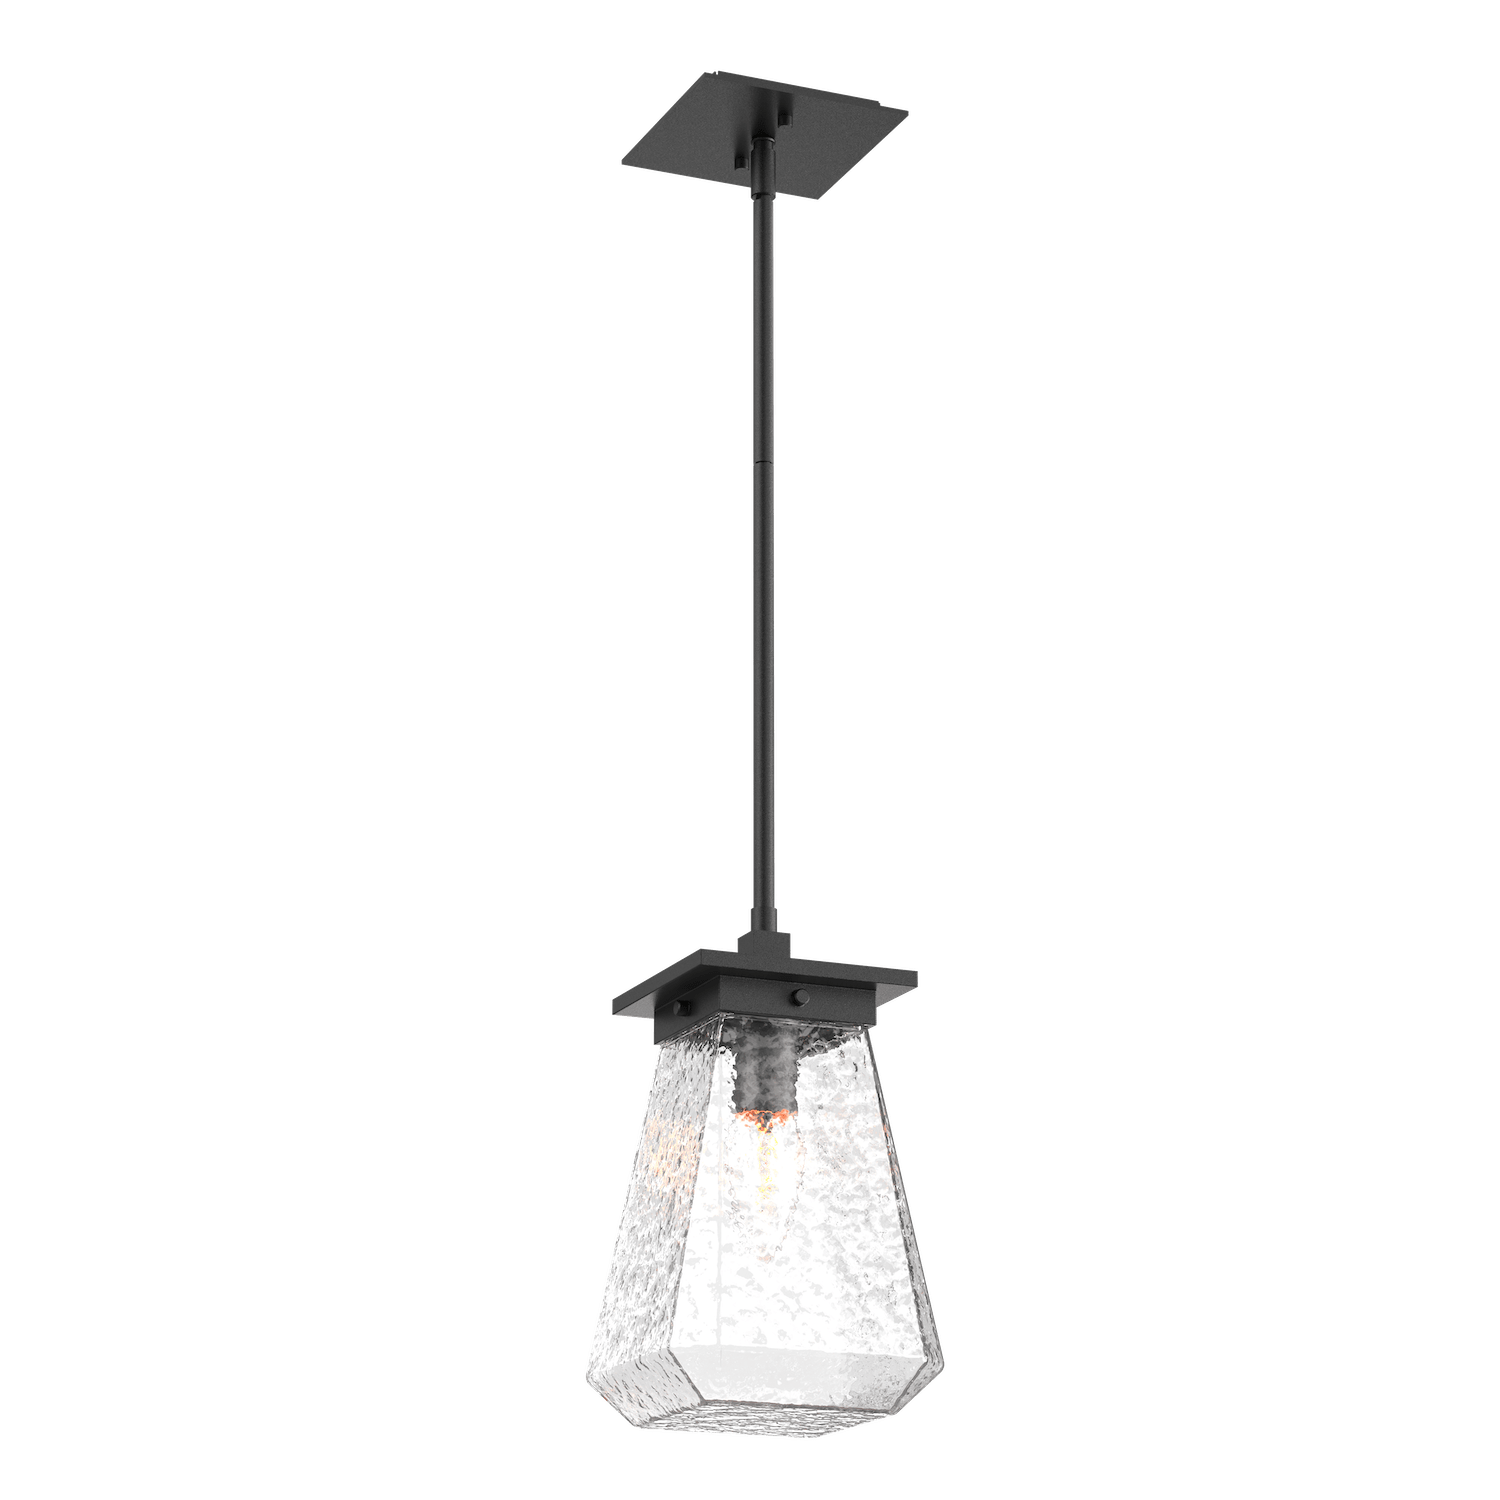 OPB0043-AH-TB-C-Hammerton-Studio-Beacon-14-inch-outdoor-pendant-light-with-textured-black-finish-and-clear-blown-glass-shades-and-incandescent-lamping